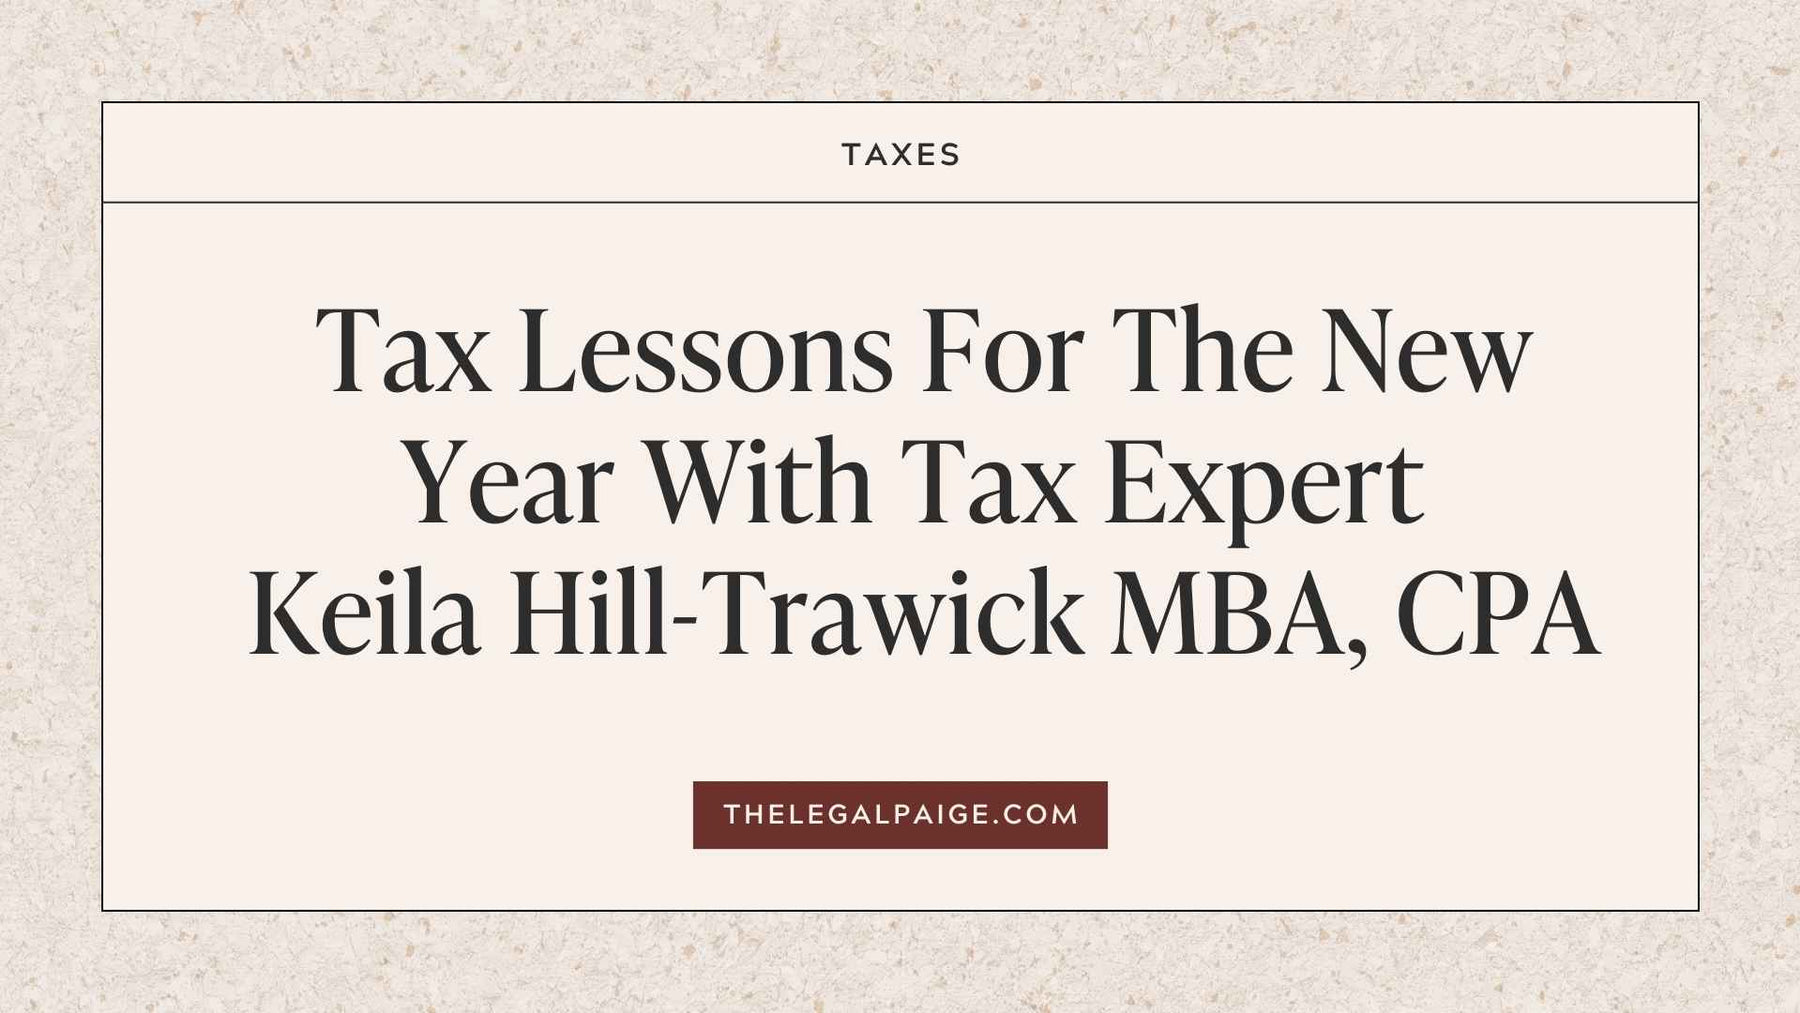 The Legal Paige - Tax Lessons for the New Year